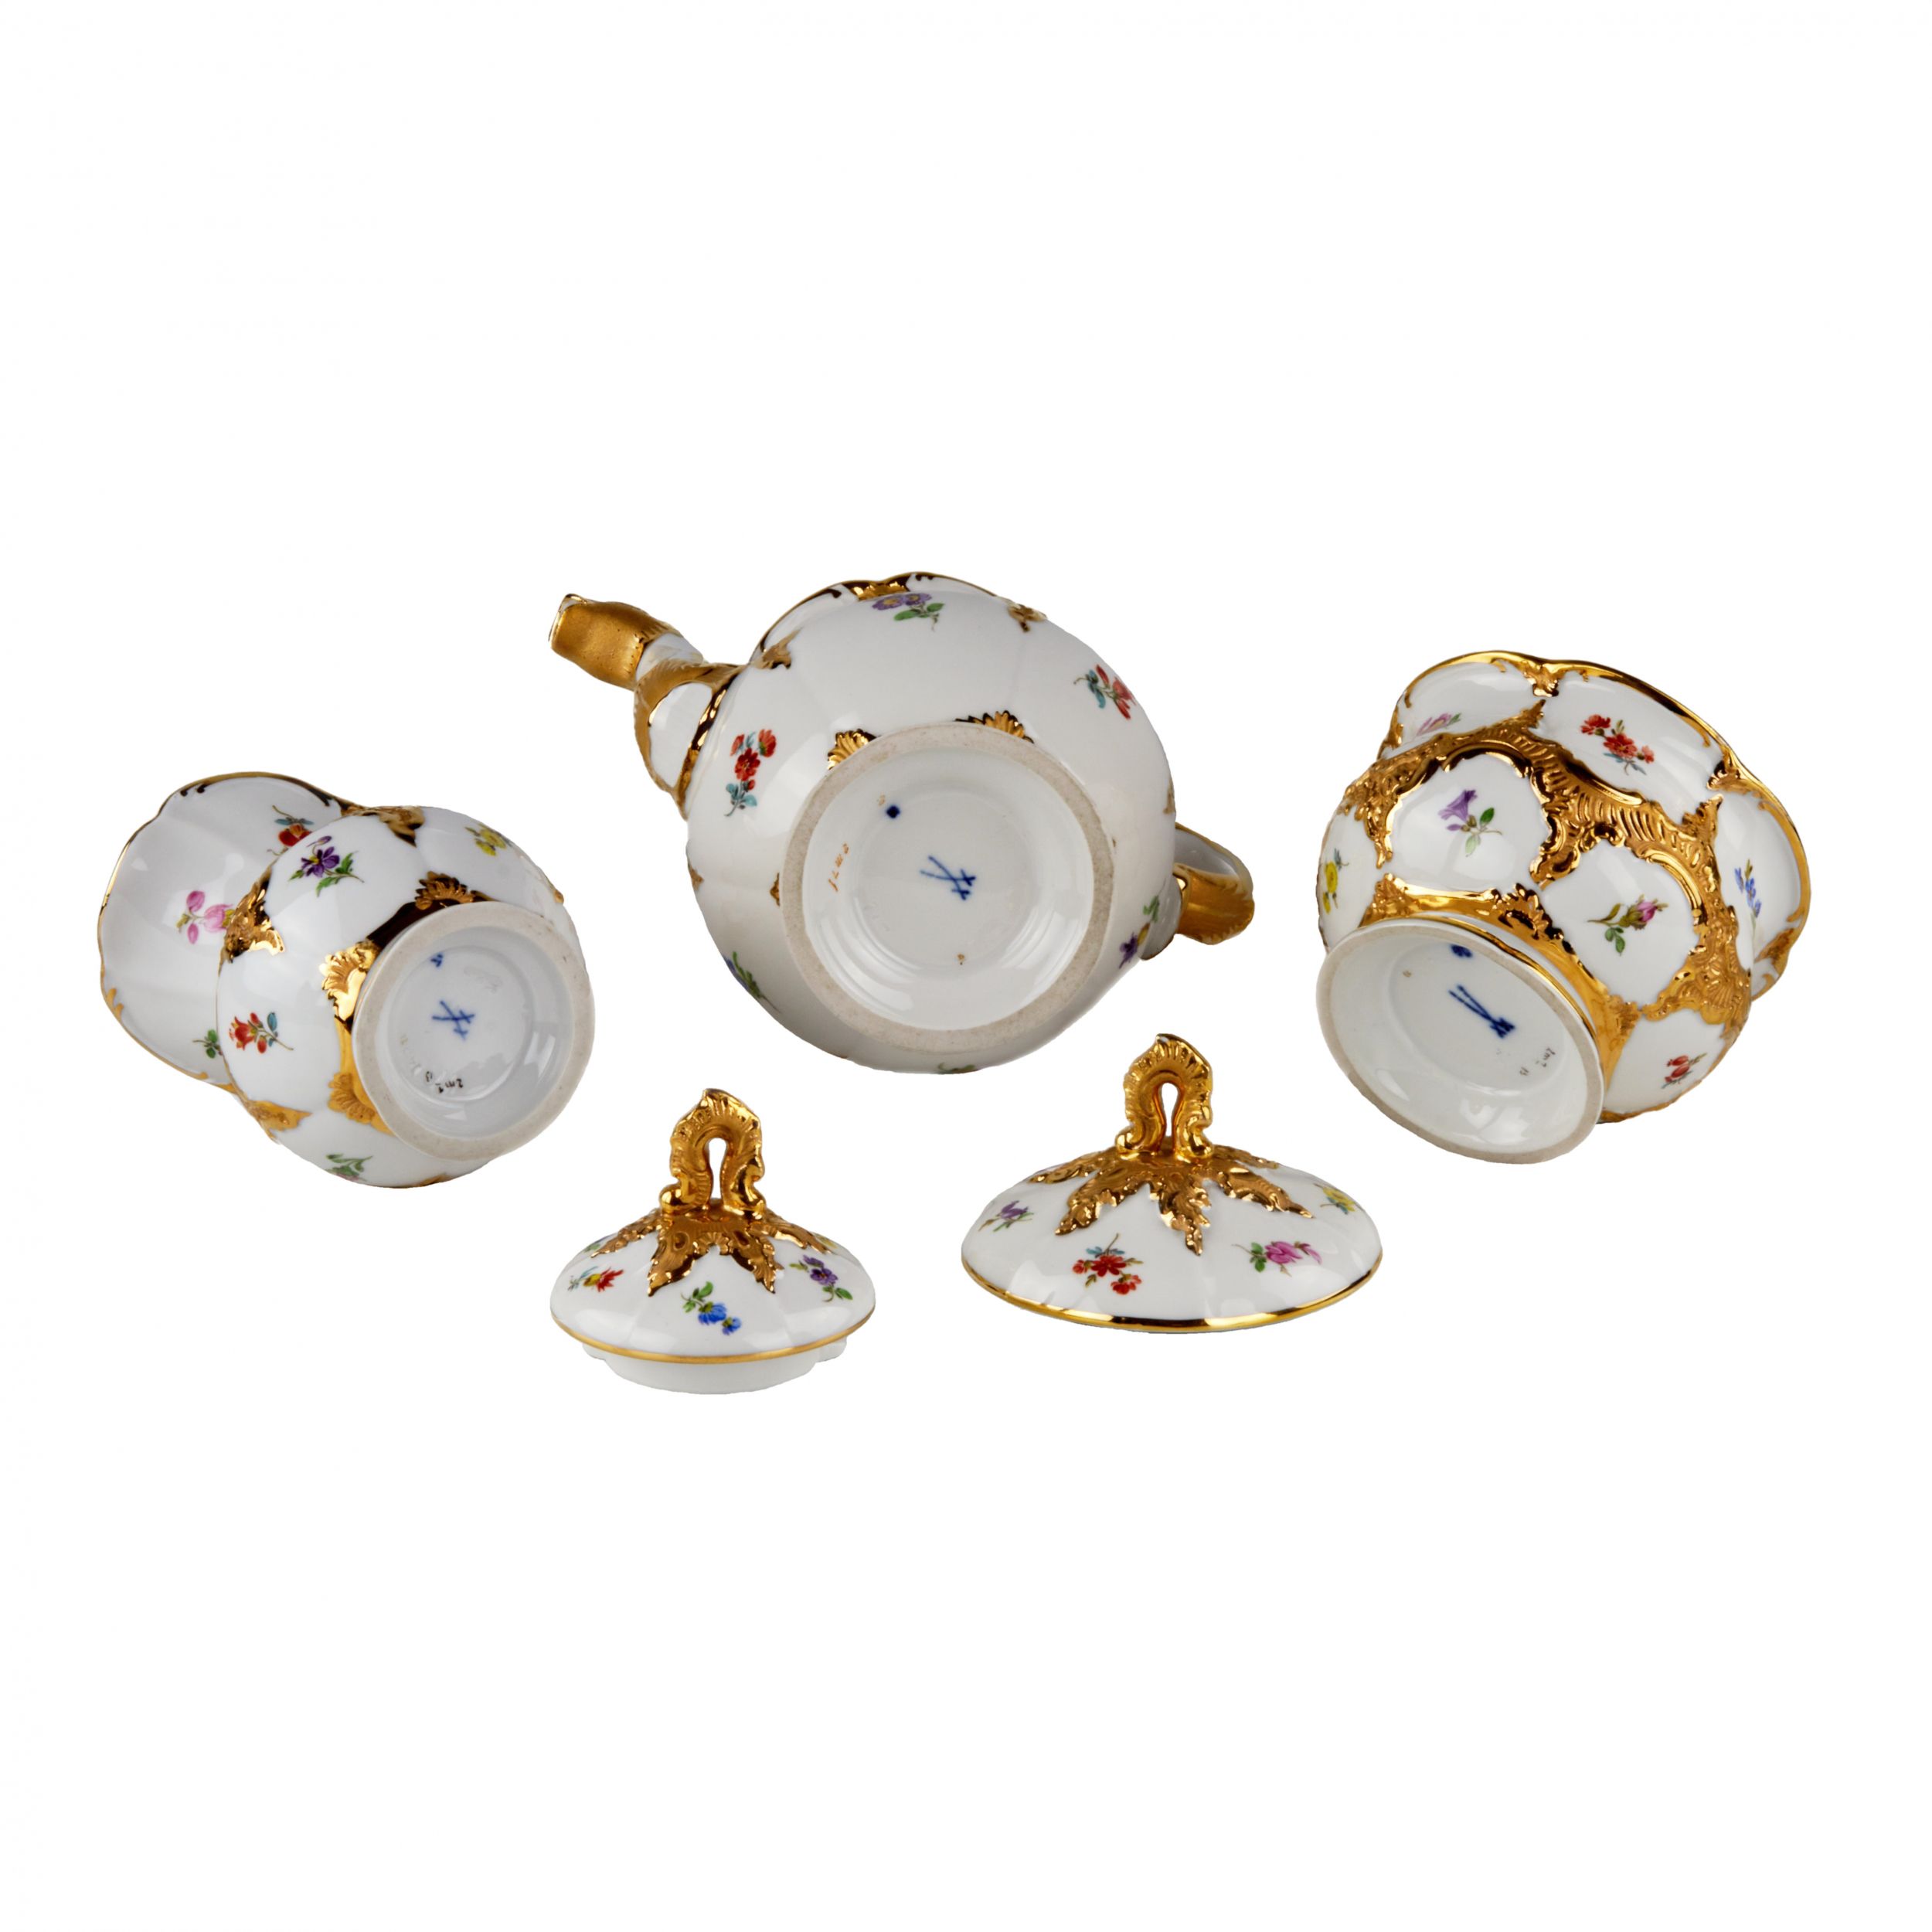 Meissen coffee service for 6 persons. - Image 8 of 9